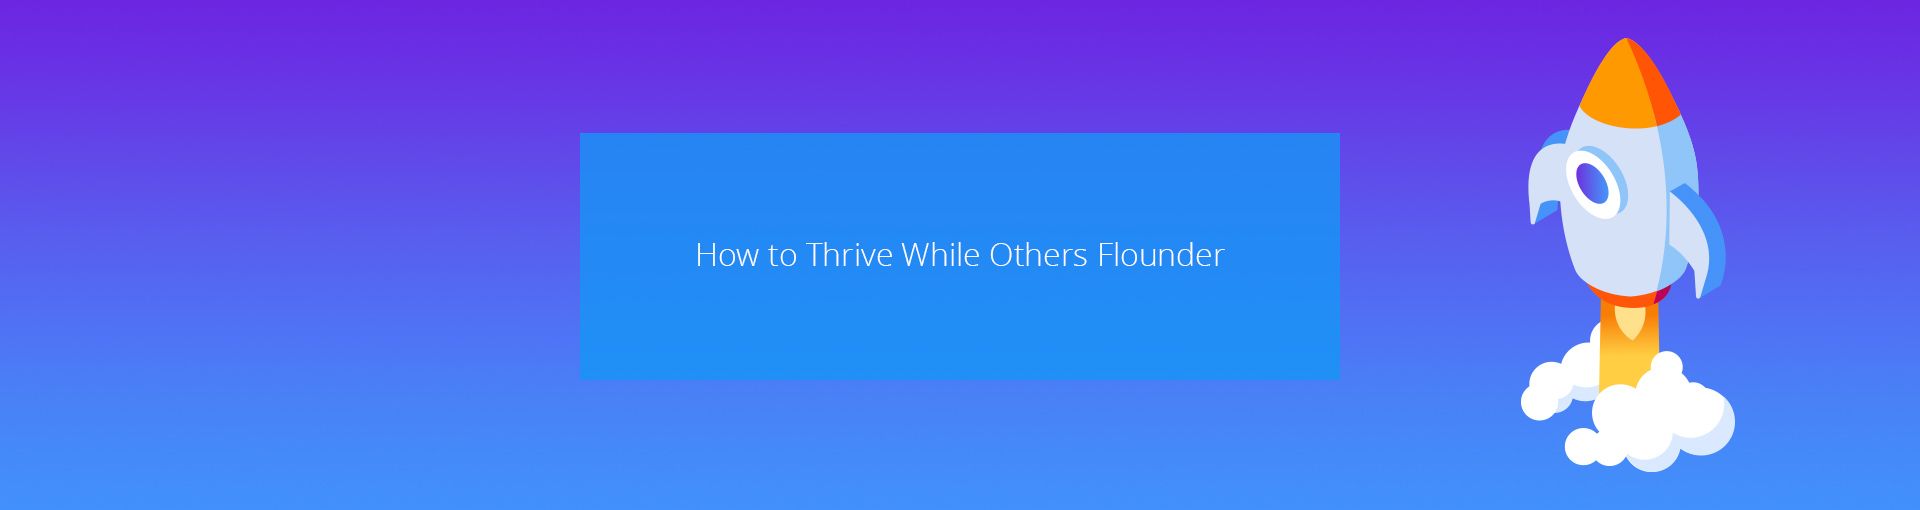 How to Thrive While Others Flounder: A/E/C Tools for Growth Featured Image